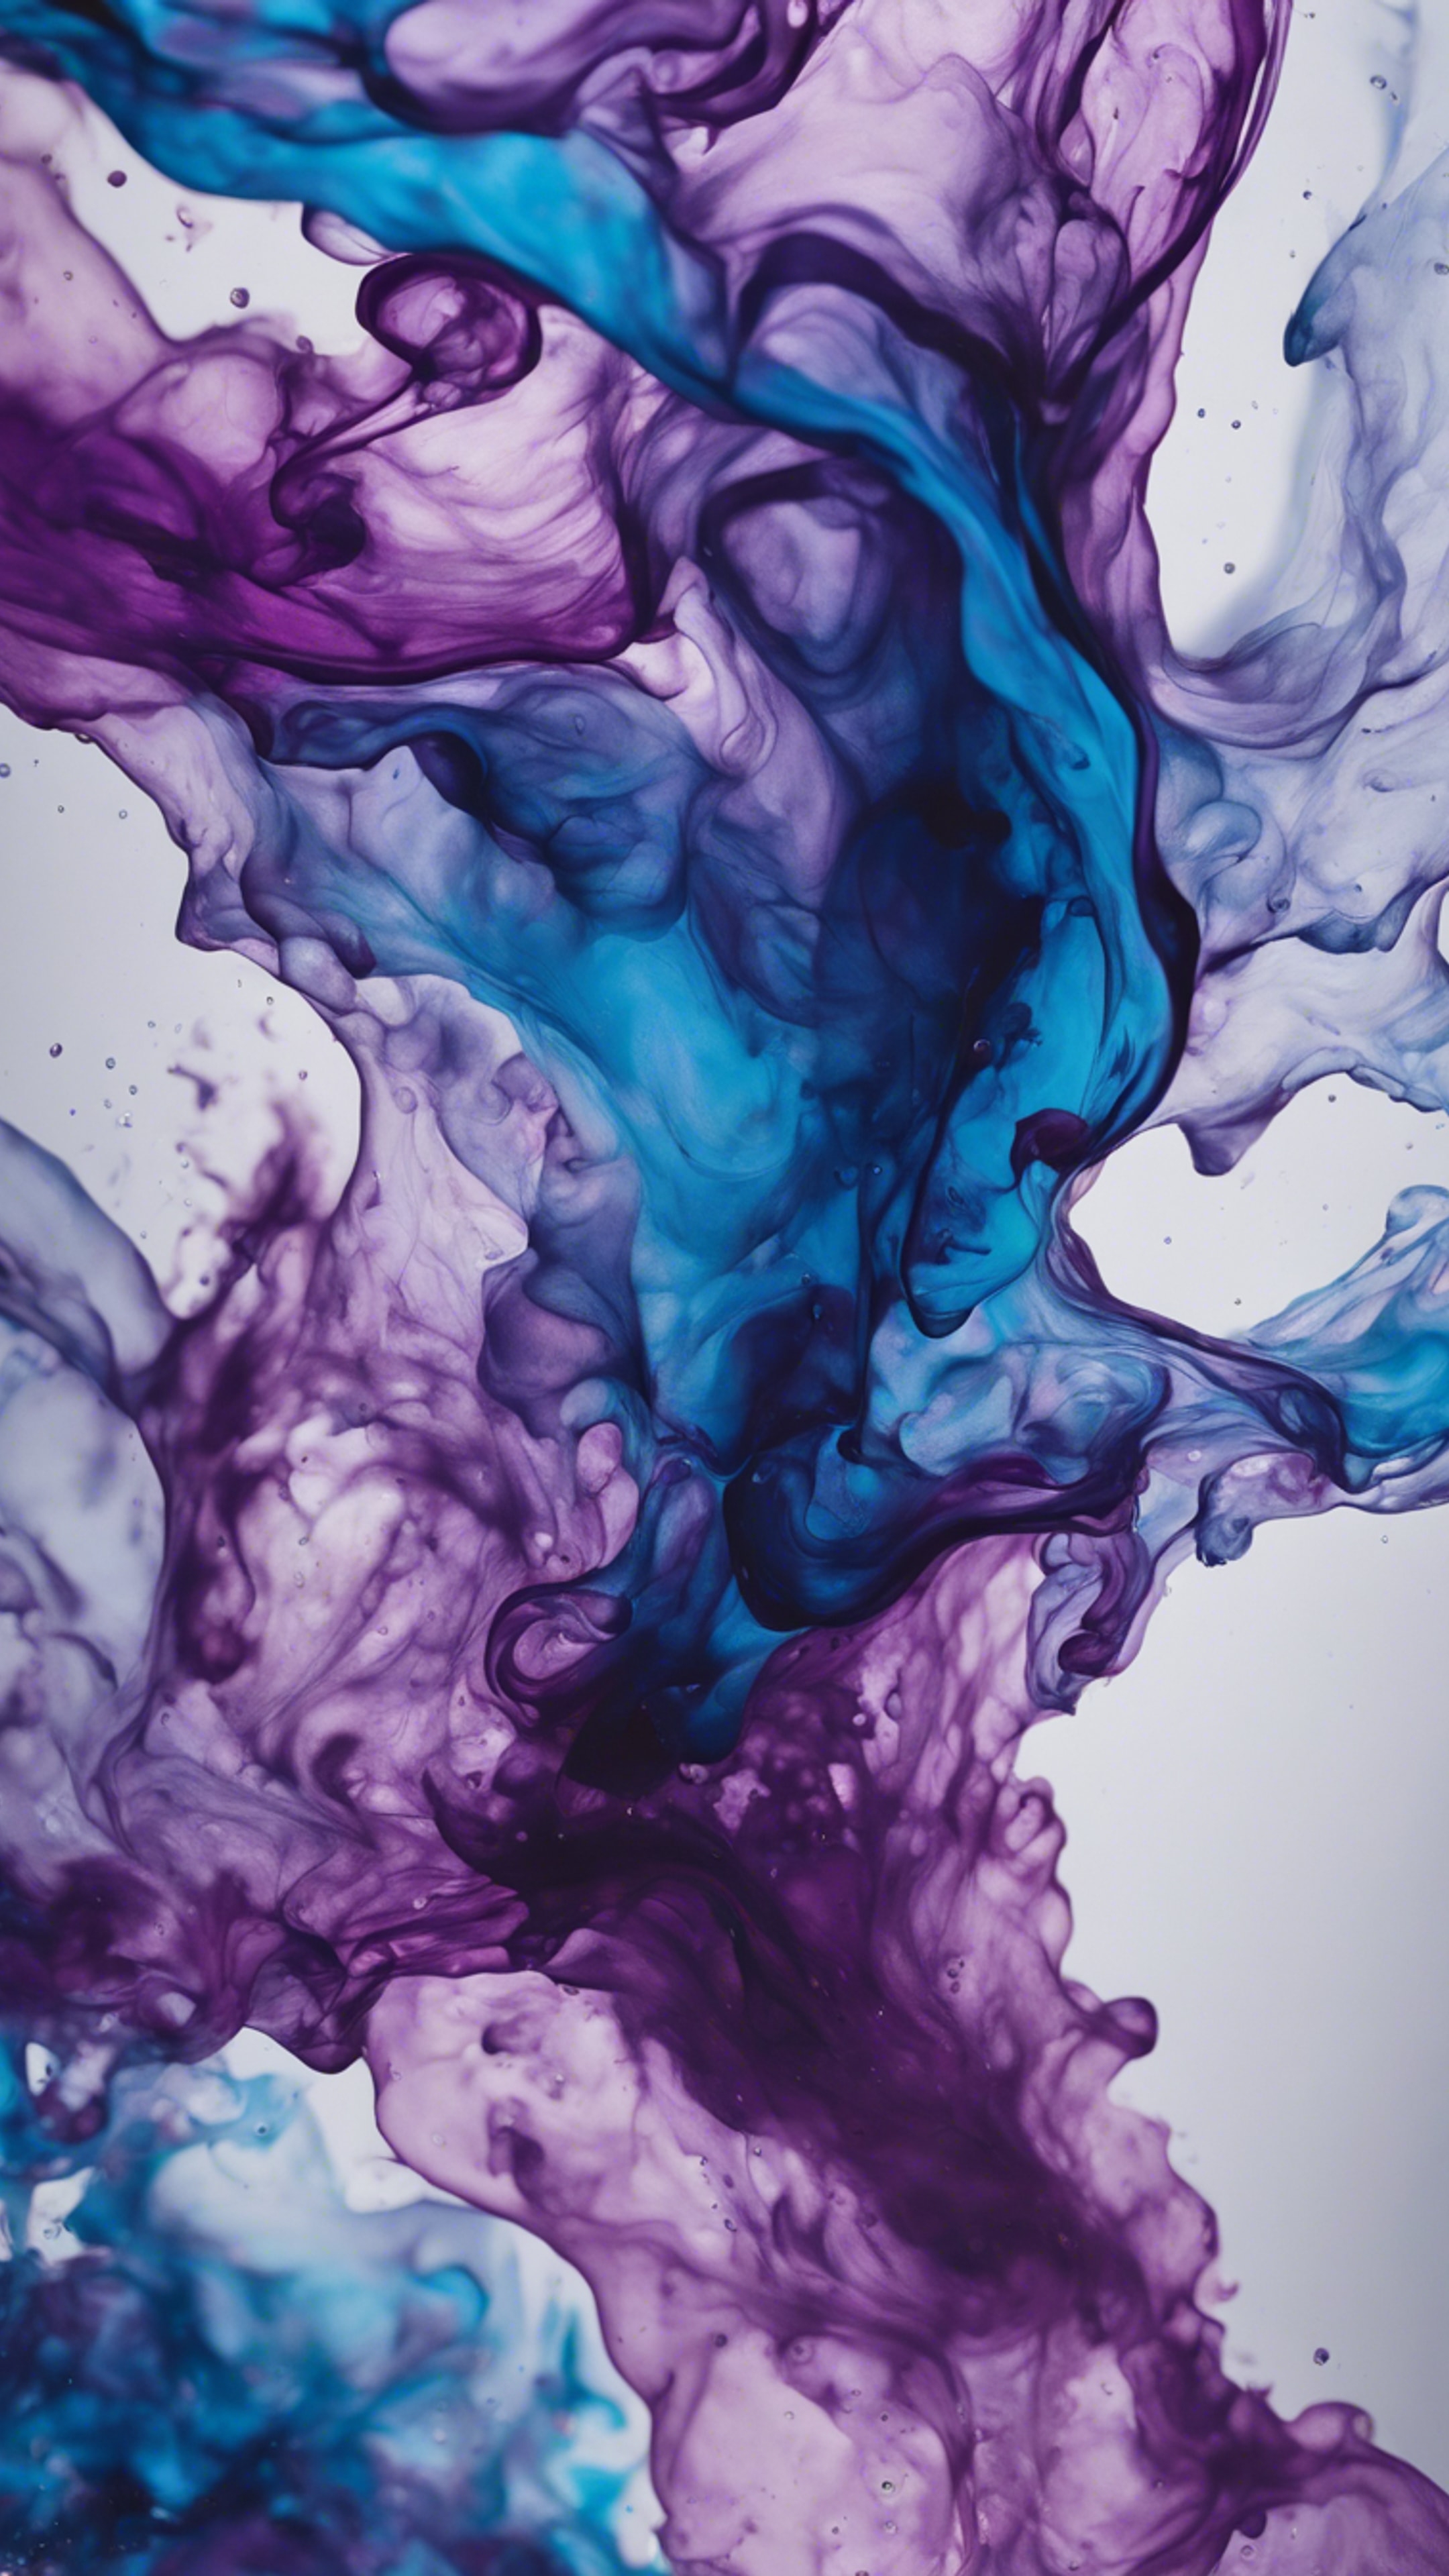 An abstract fluid art piece with swirling waves of ink in hues of cool blue and passionate purple. Hintergrund[1f0e9ffb93e84991a030]